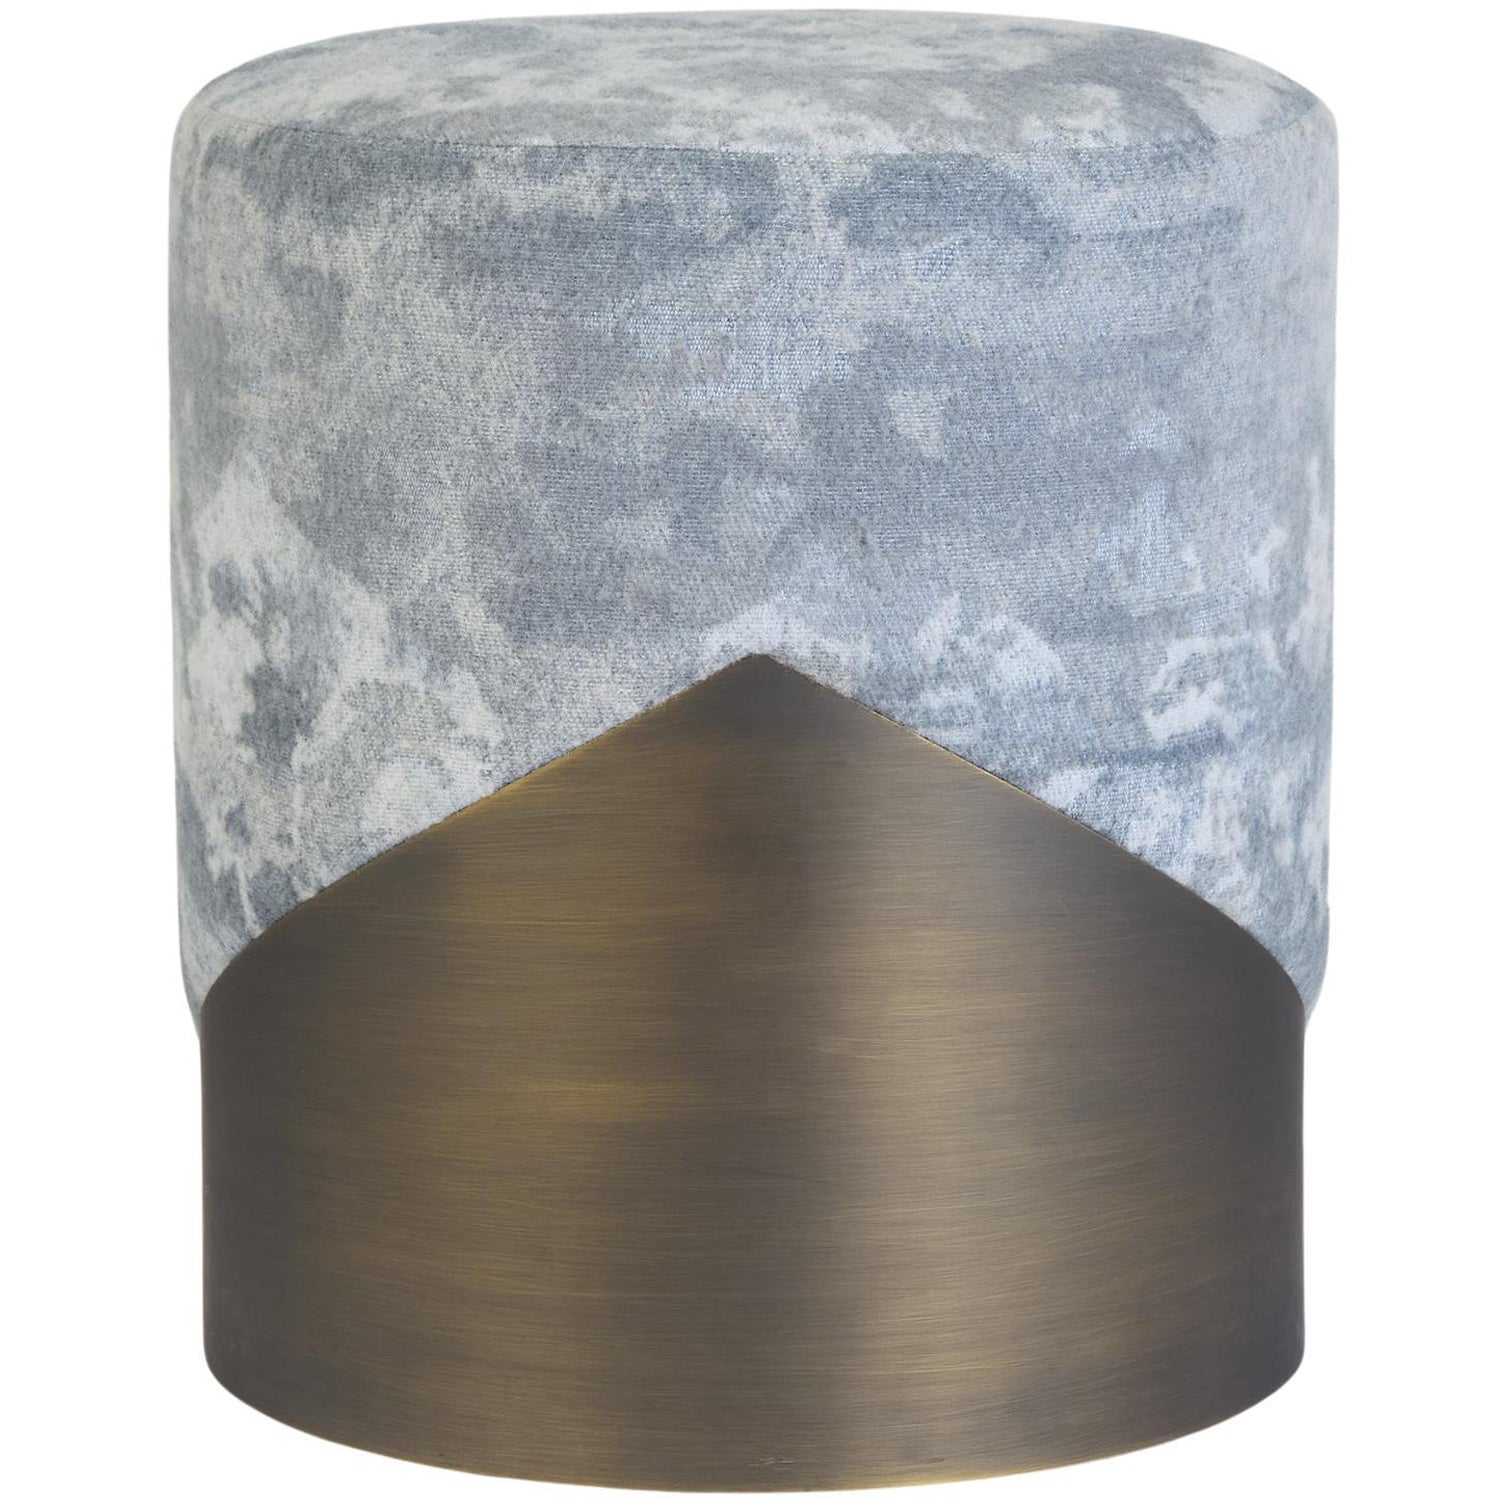 Lune V Stool, Upholstery and Dark Bronze, Handcrafted by Duistt